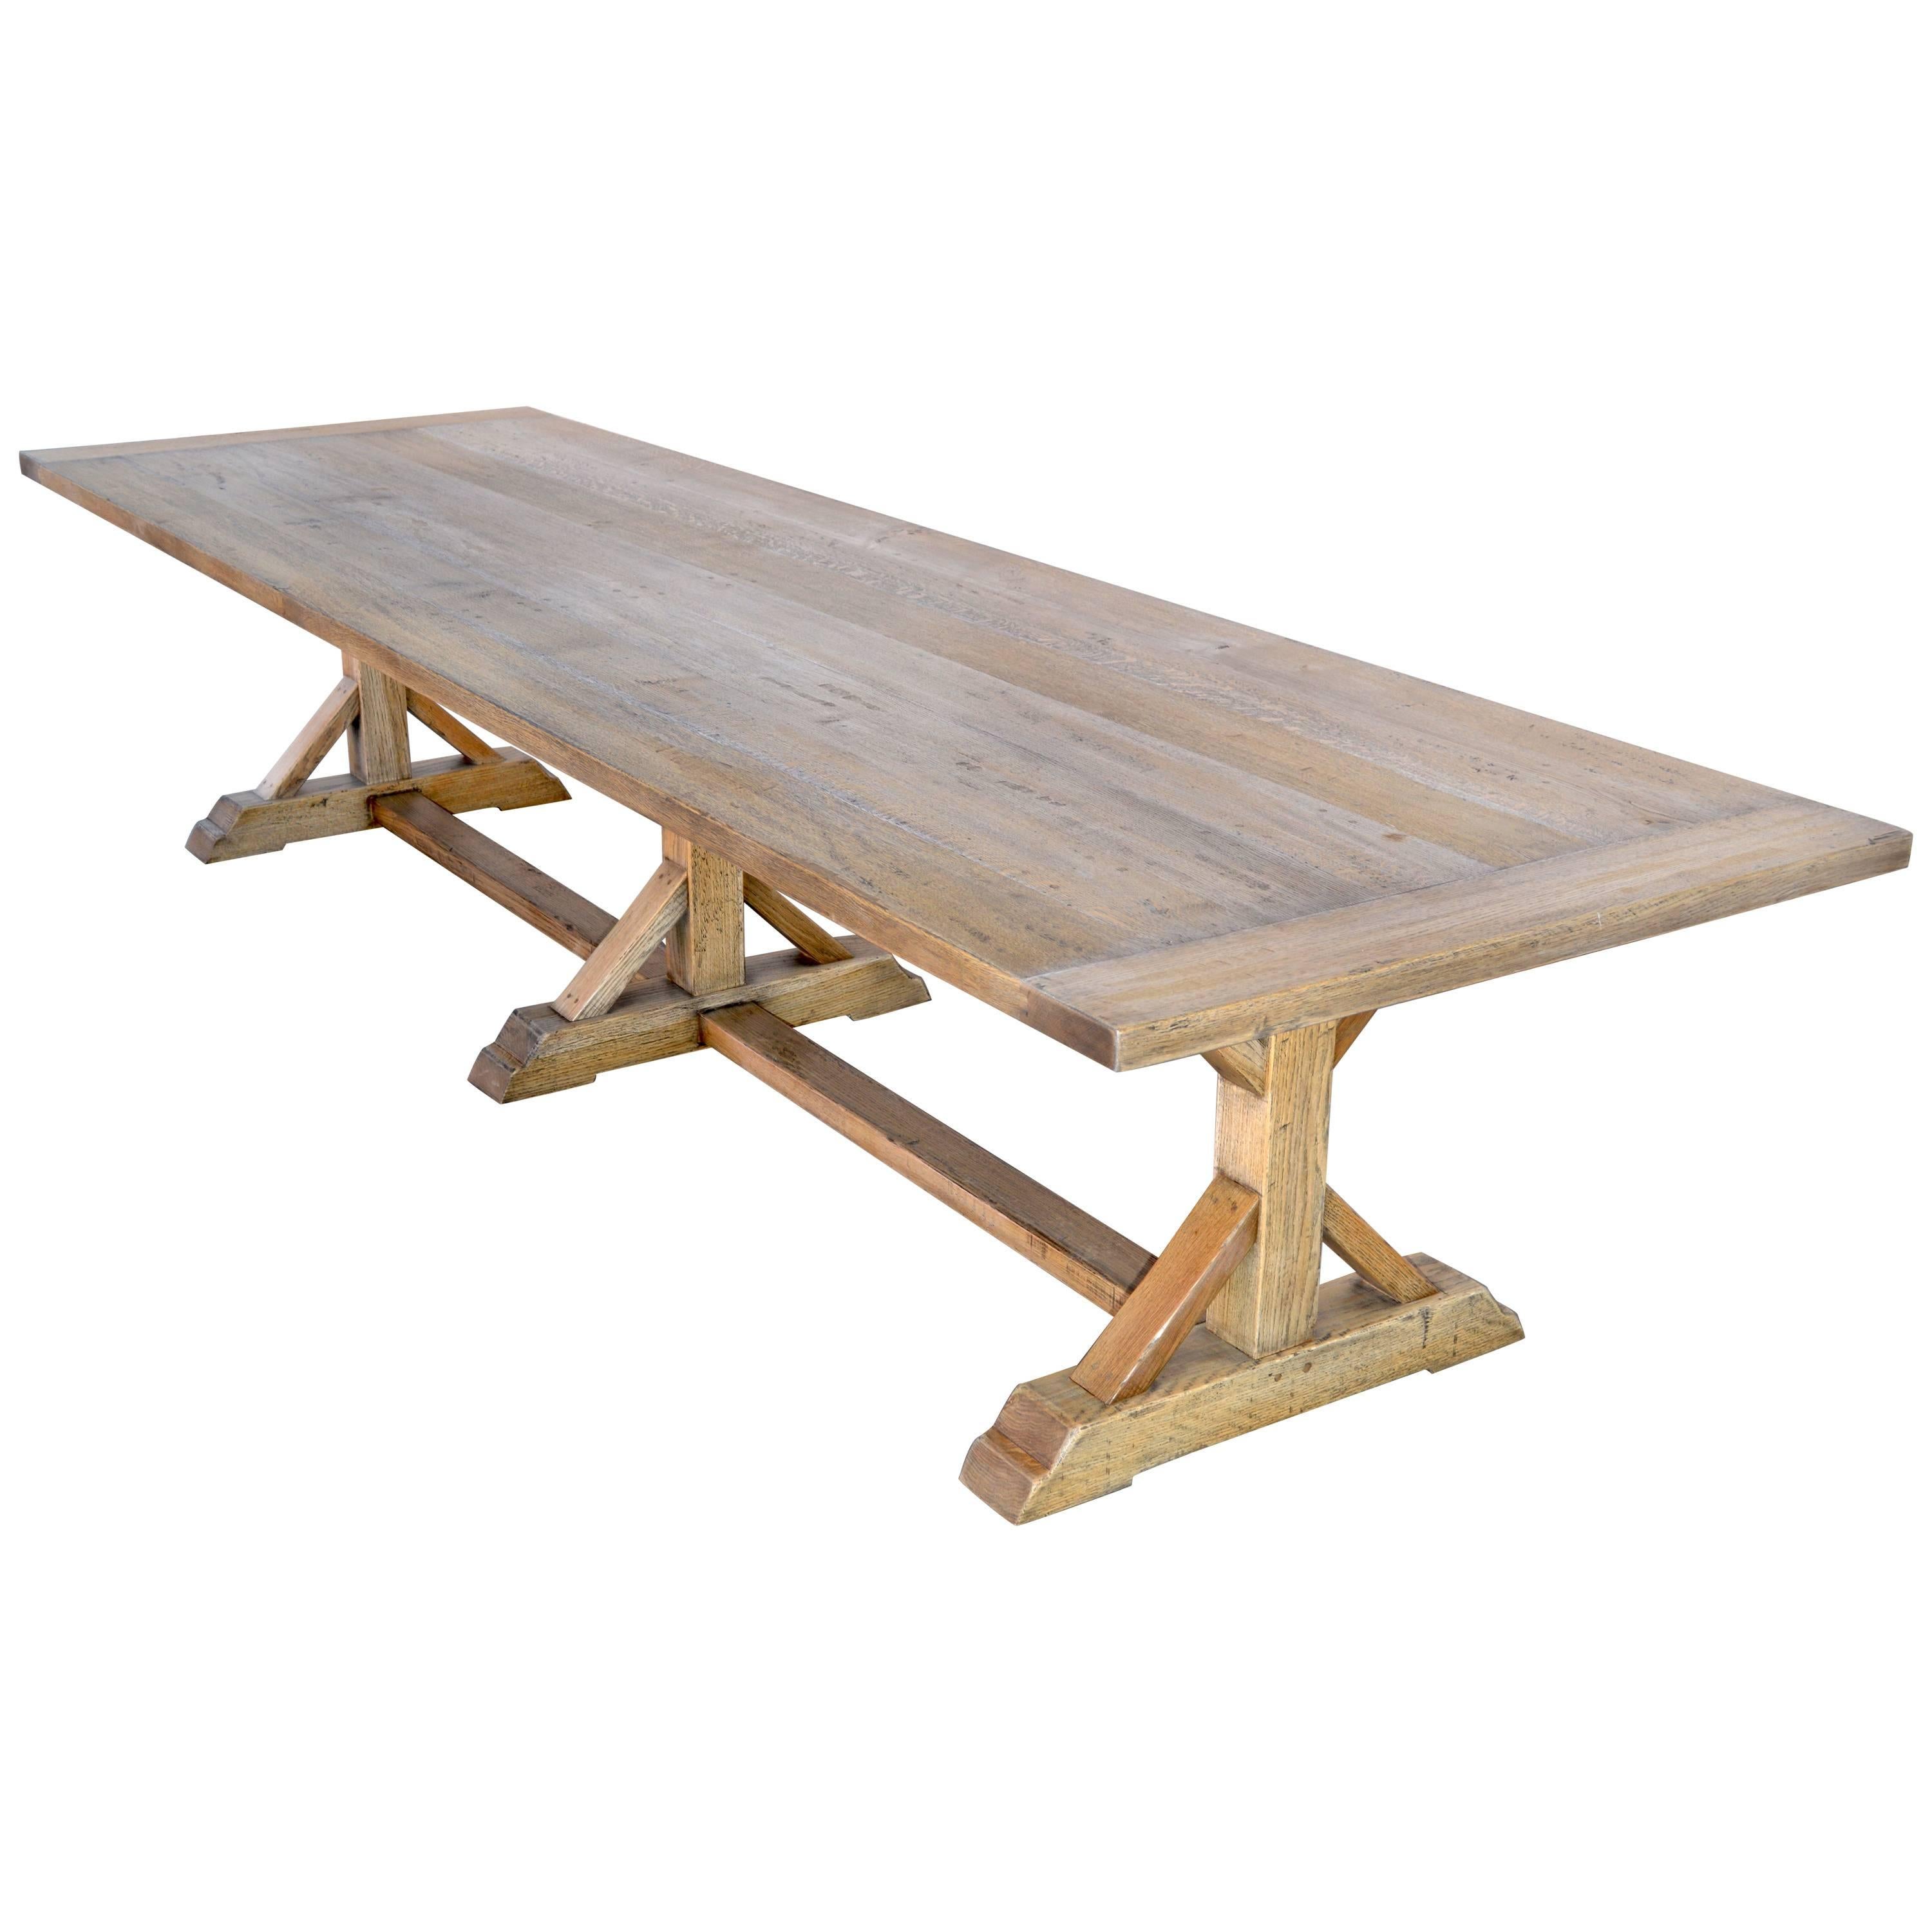 Custom Farm Table in Vintage White Oak, Built to Order by Petersen Antiques